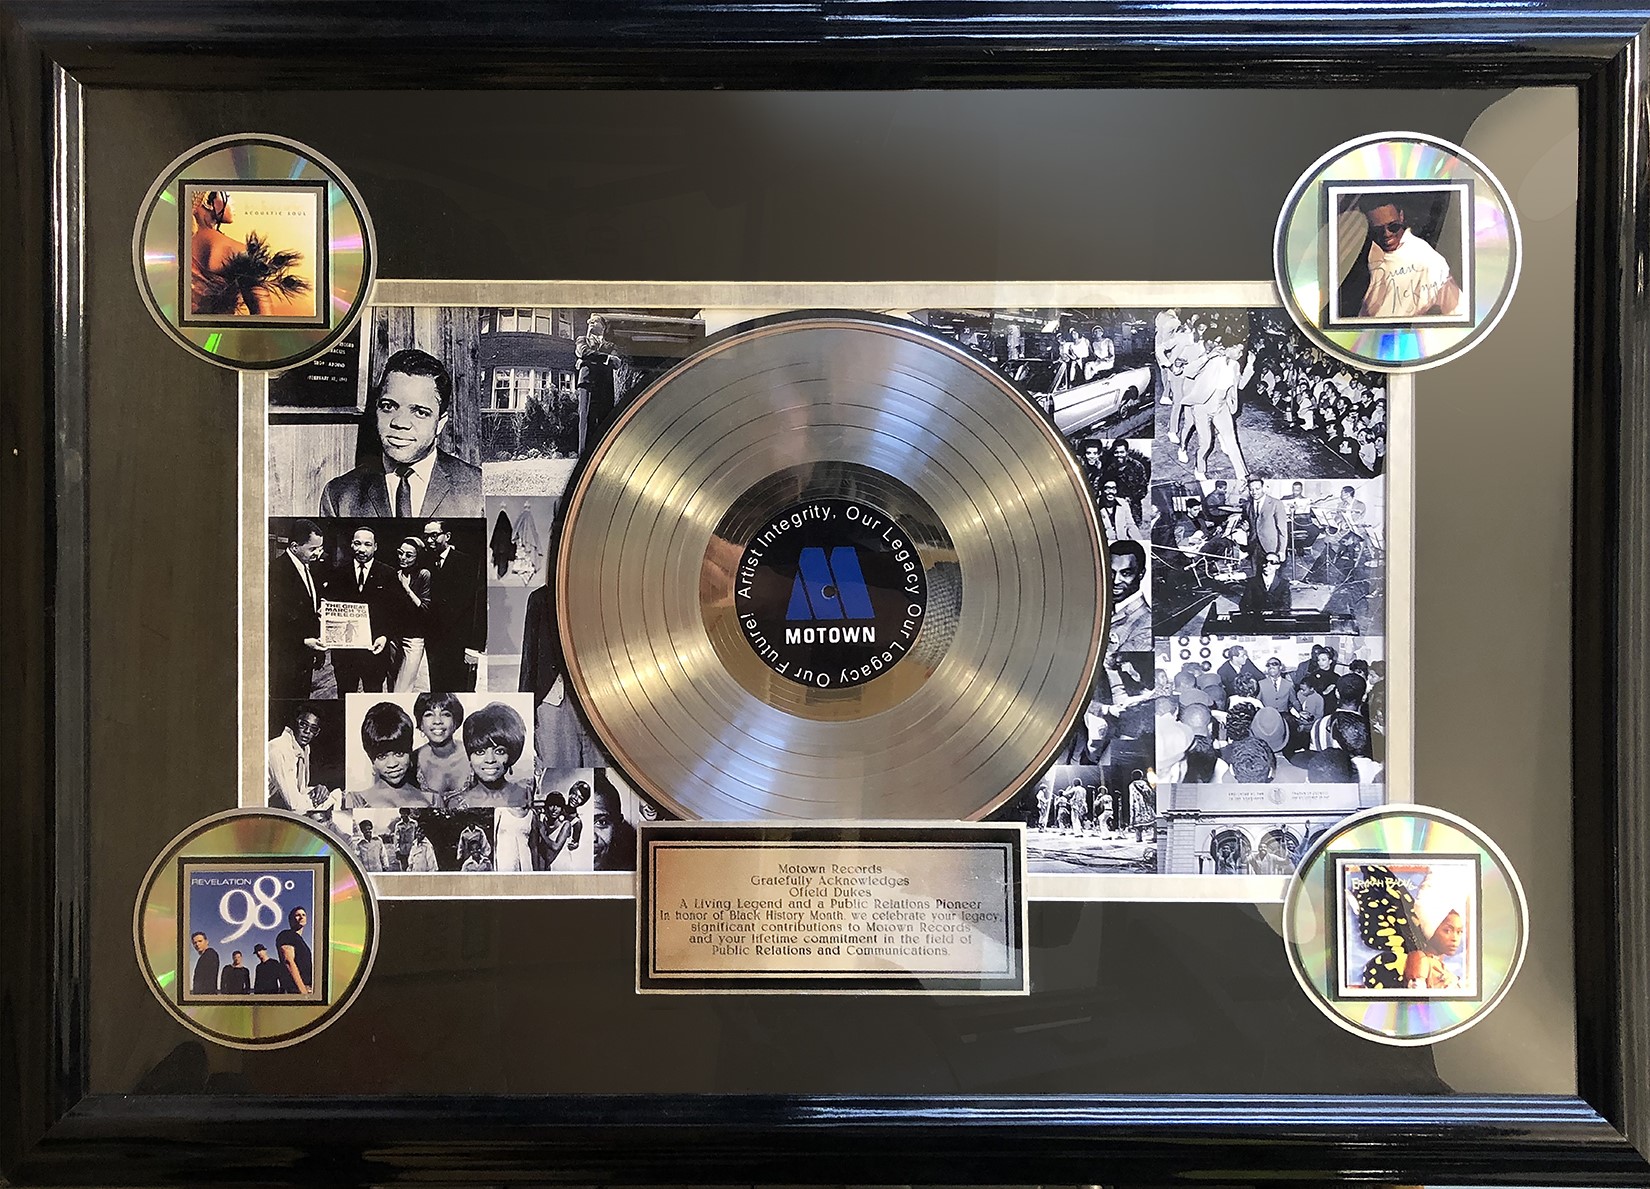 A plaque given by Motown Records in honor of Ofield Dukes.